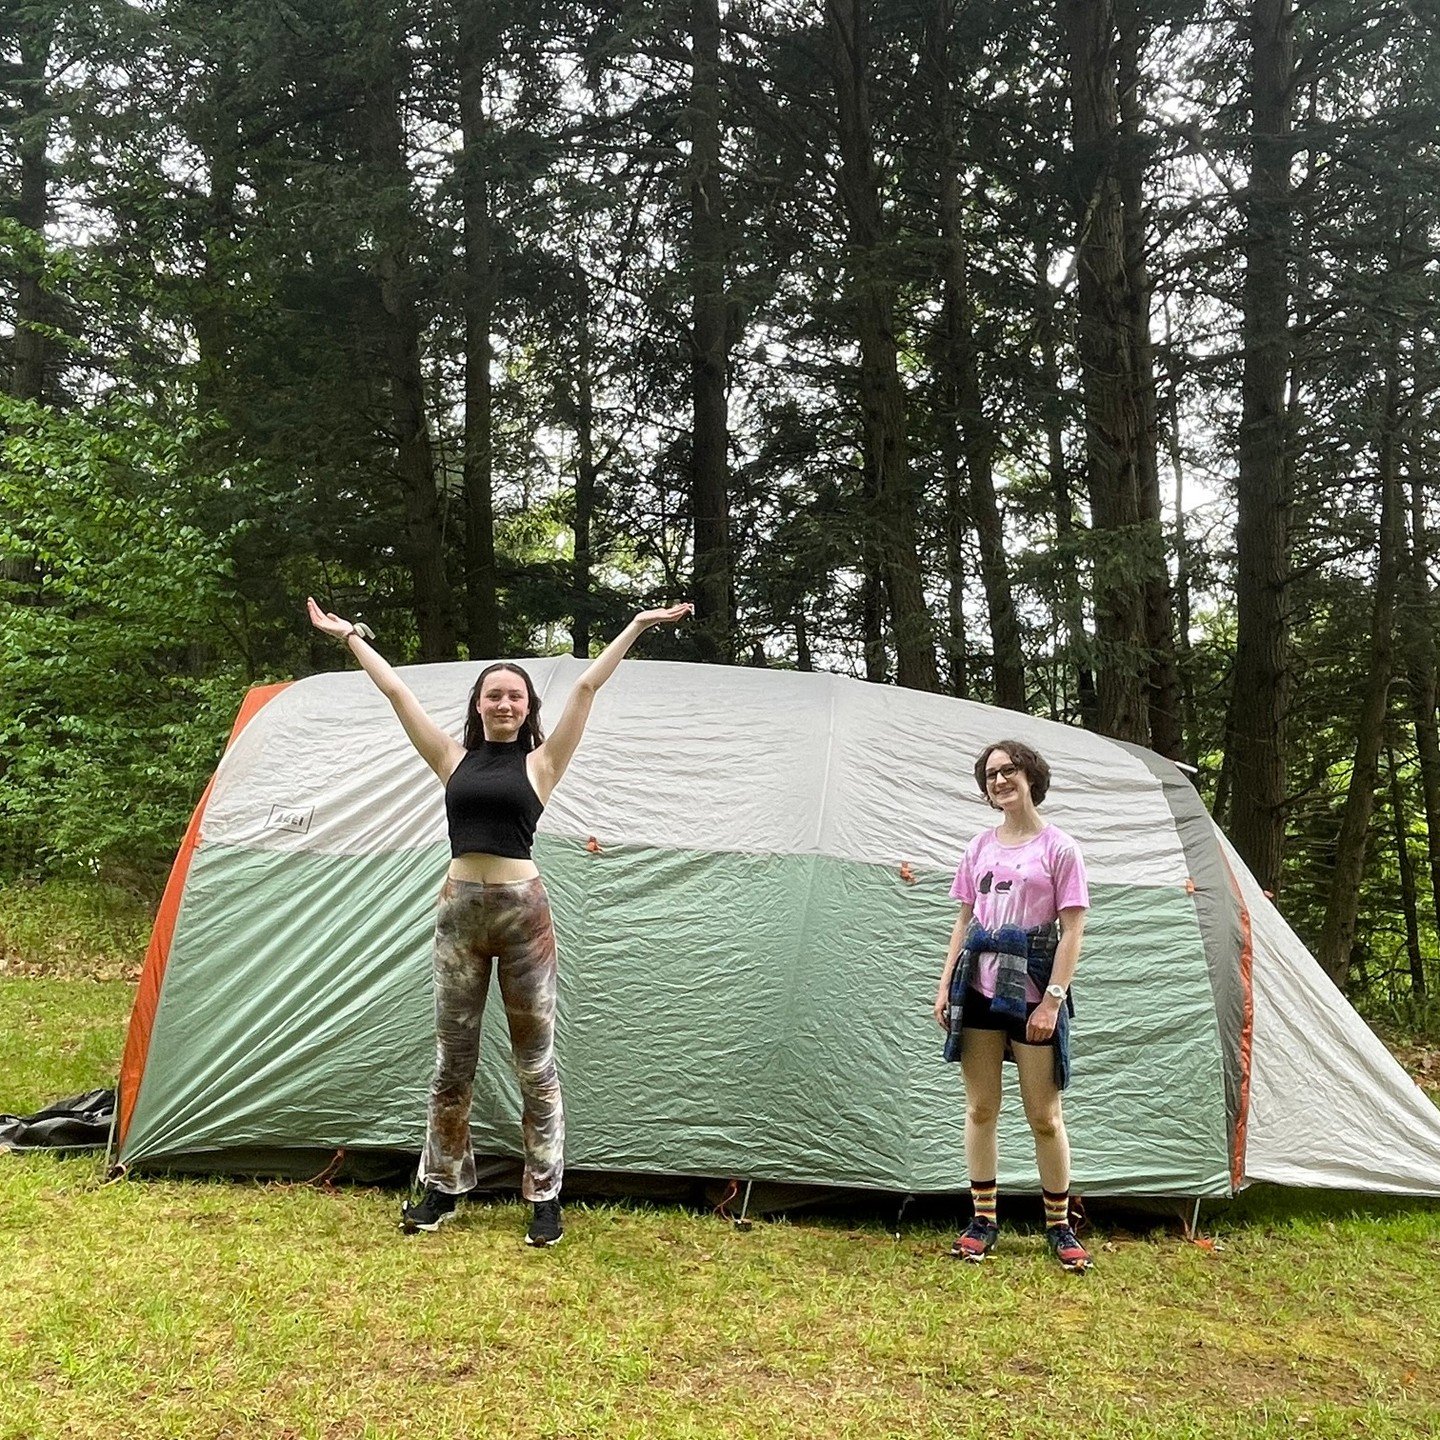 The 7th and 8th graders are off on their culminating Wilderness Trip! After learning wilderness skills during weekly classes, each student identifies wilderness skill goals related to shelter, water, fire, and food that they will put into practice in